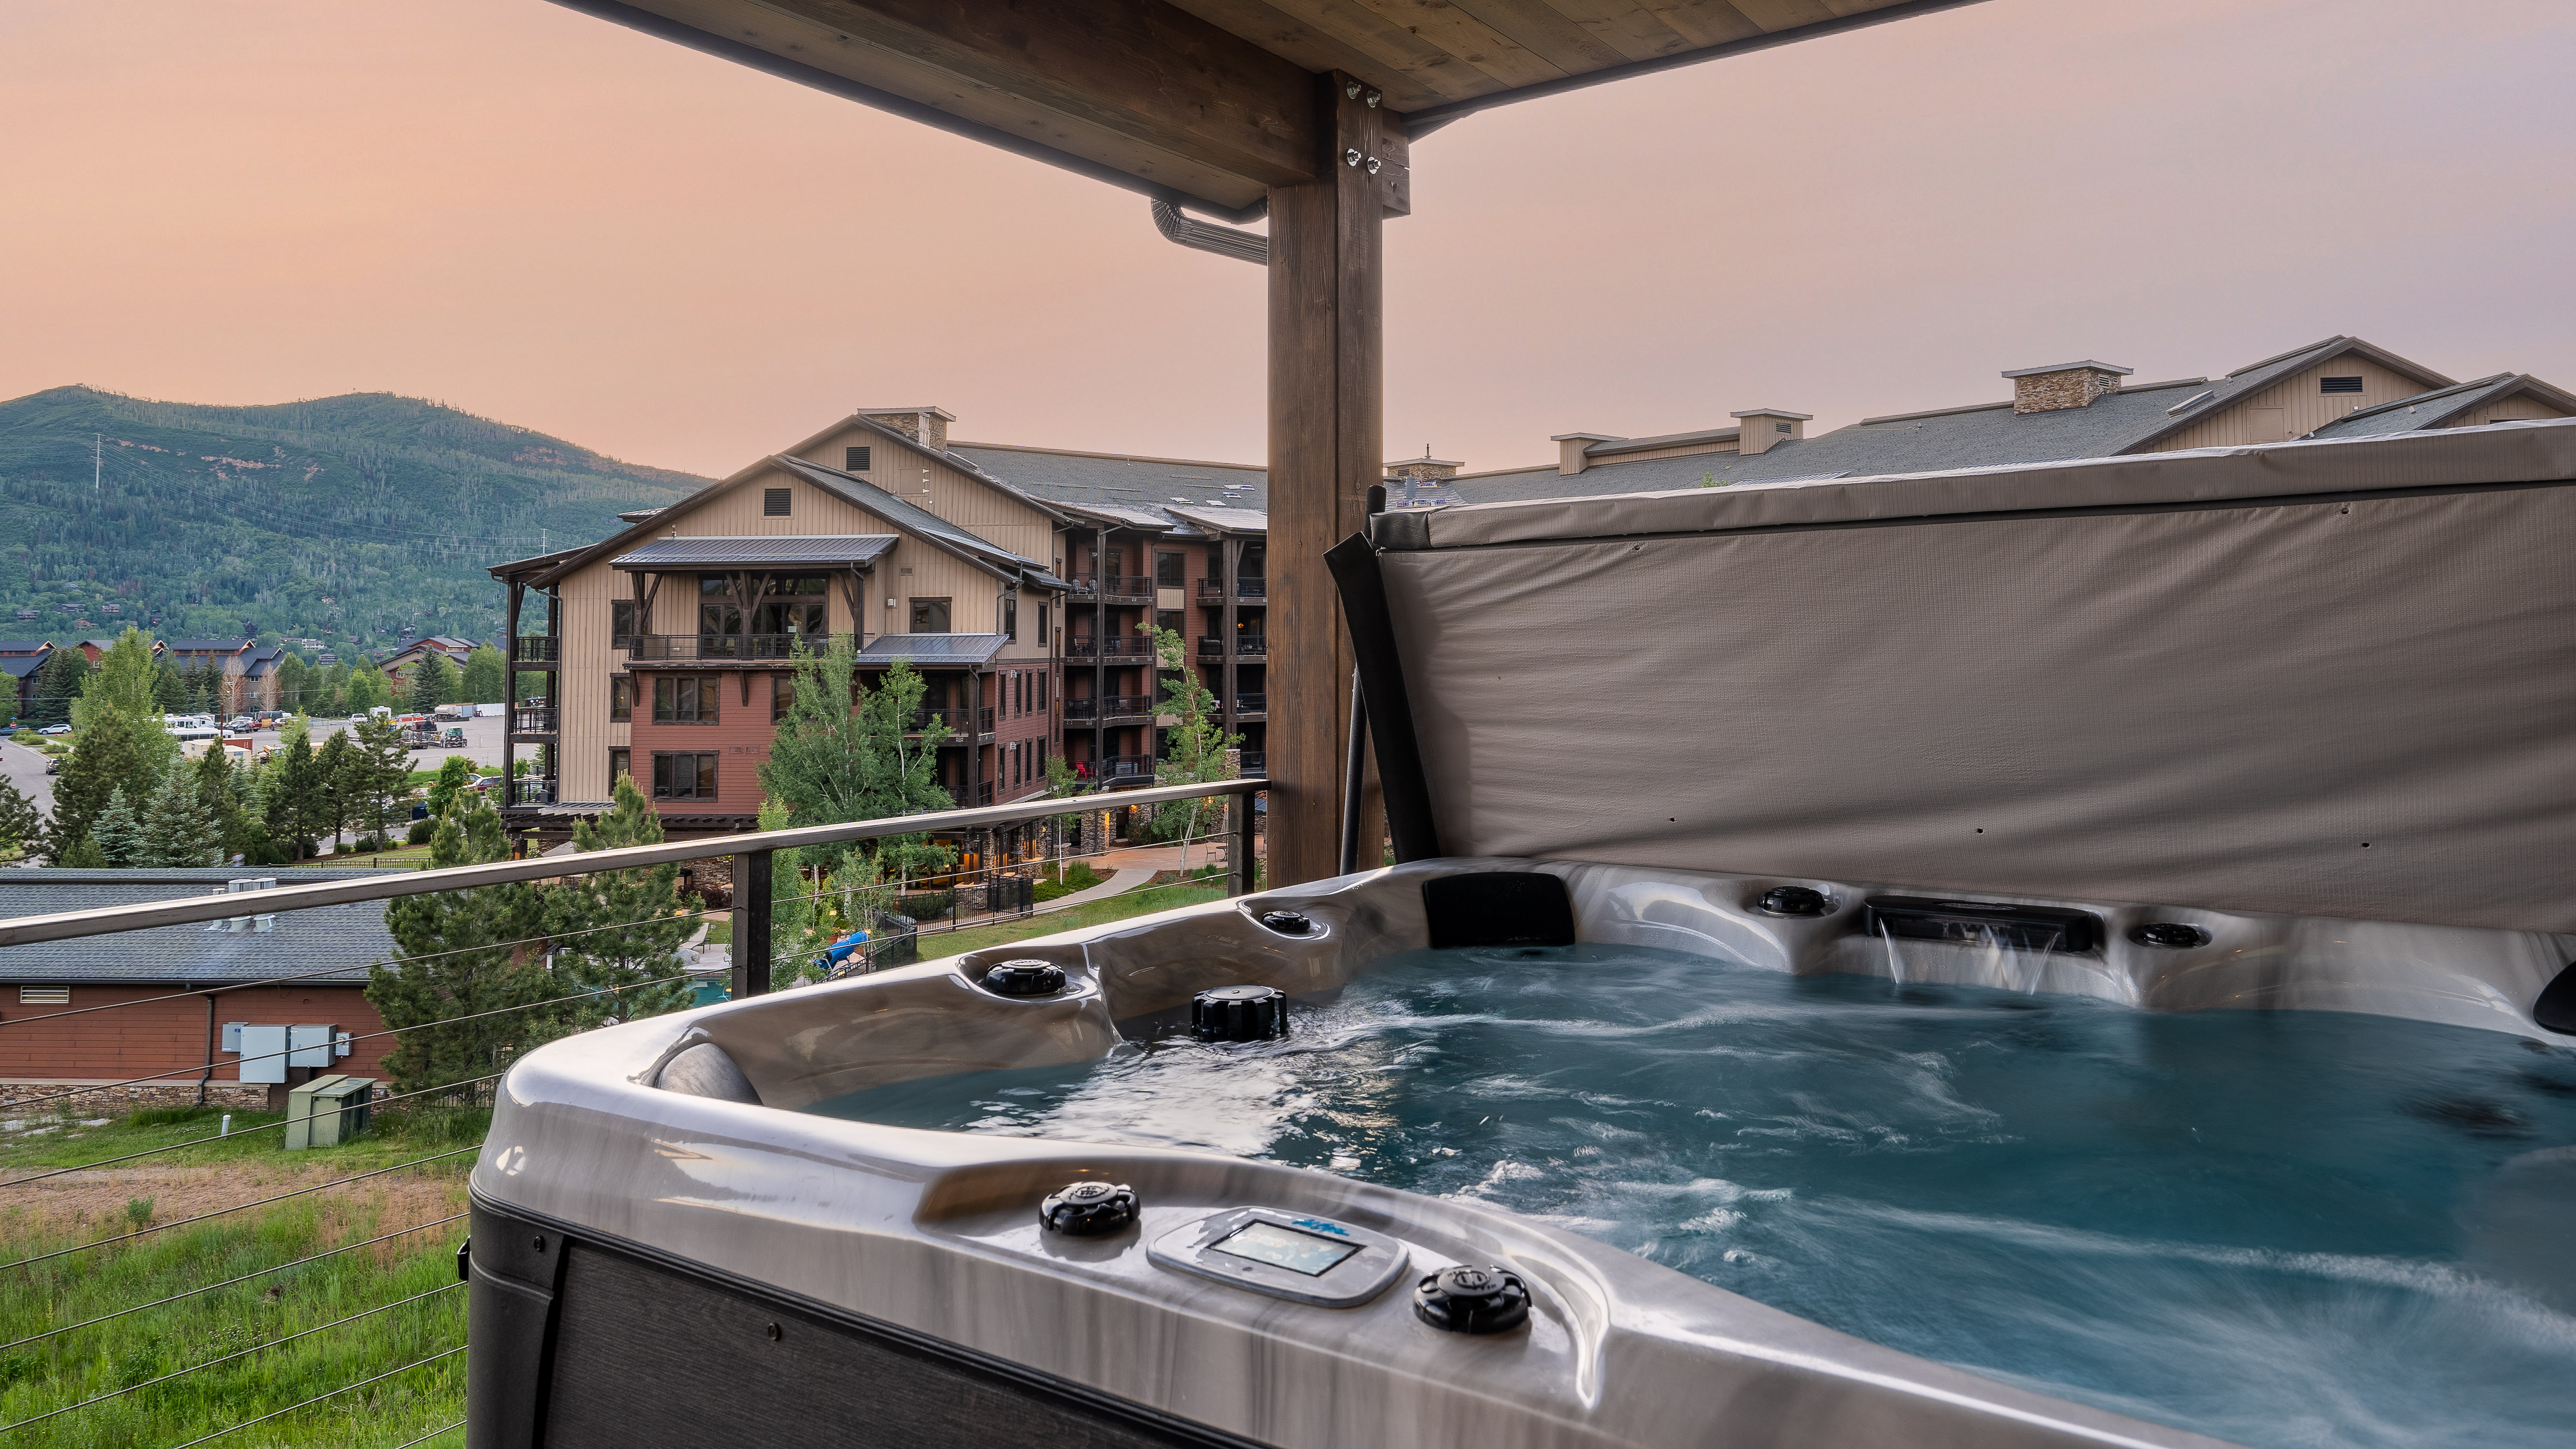 Relax in the private outdoor hot tub